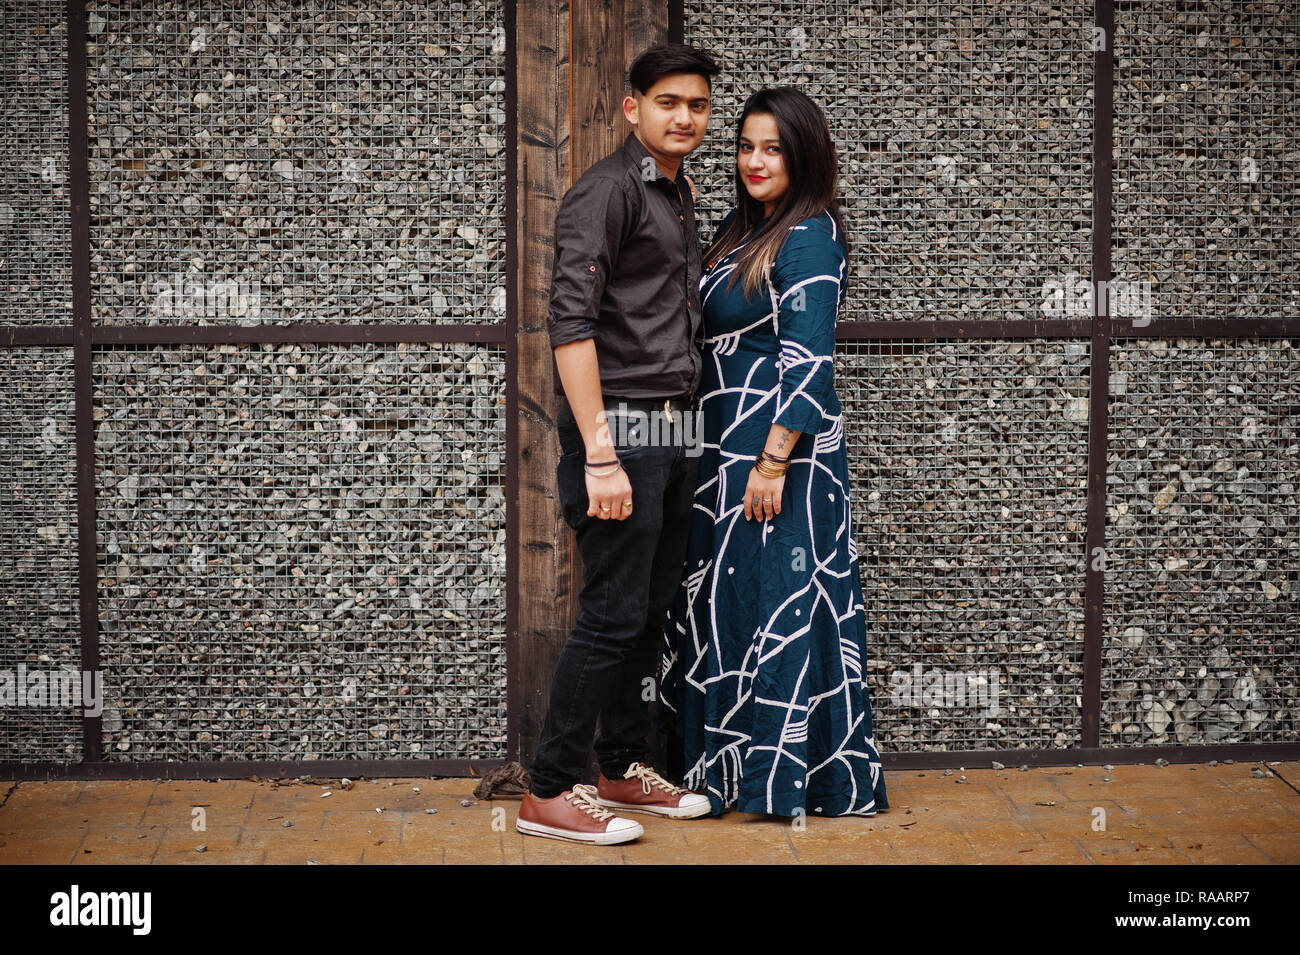 The Best Engagement Photo Shoot Poses for Indian Couples!